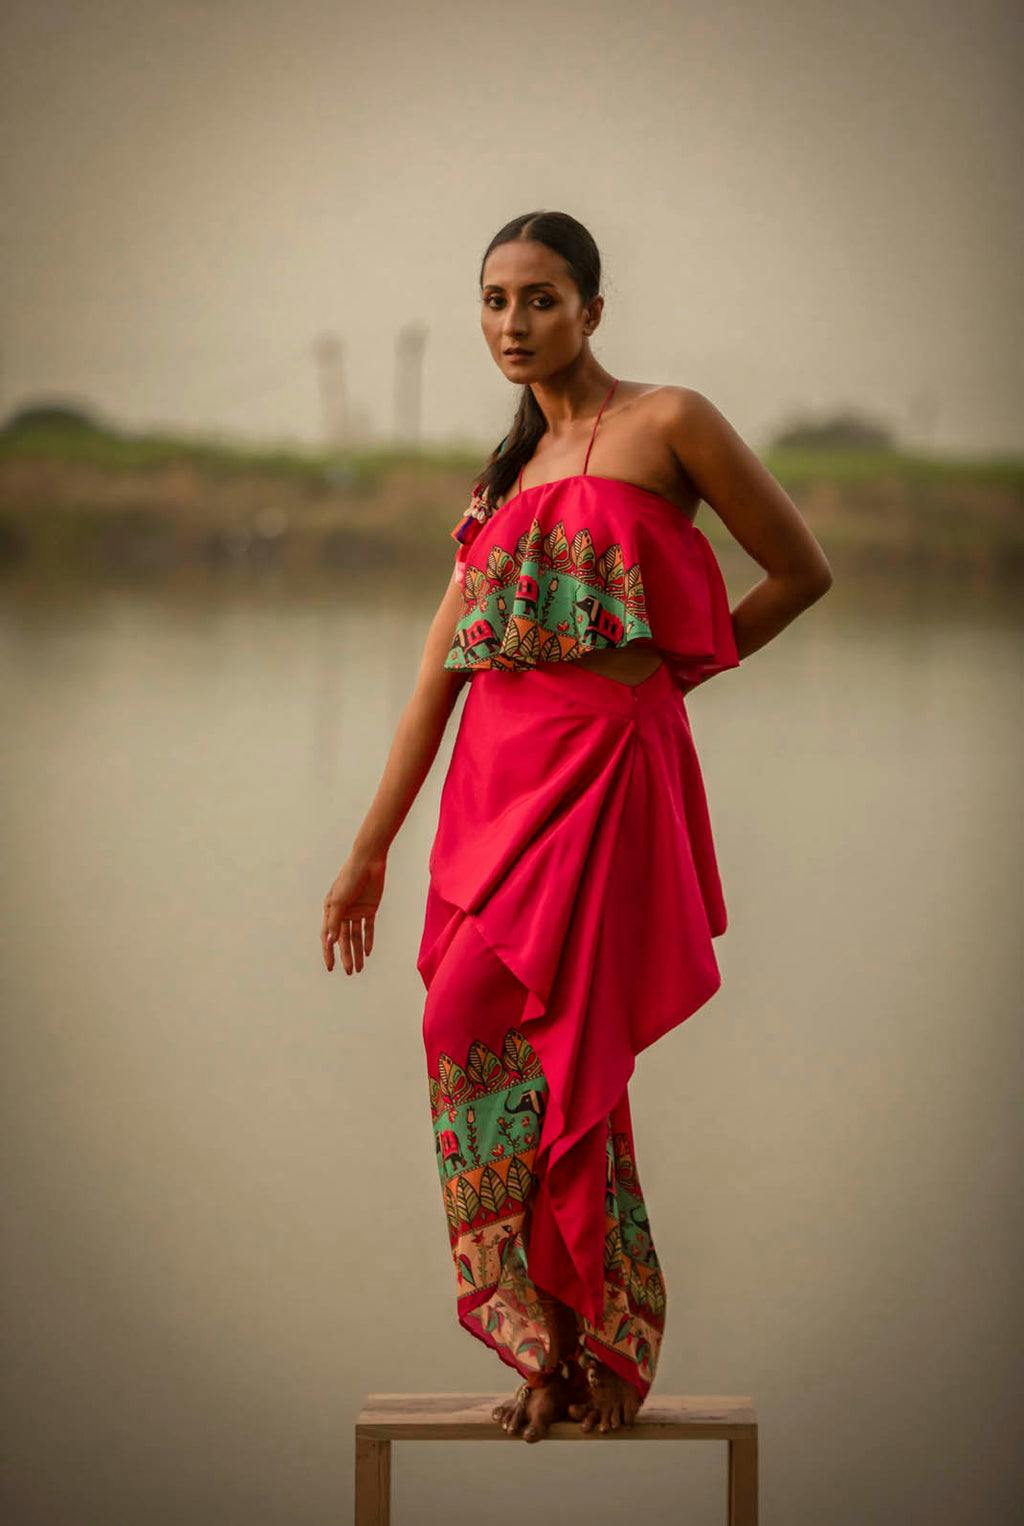 Imara Structured Drape Skirt With Flair Top, a product by COEUR by Ankita Khurana